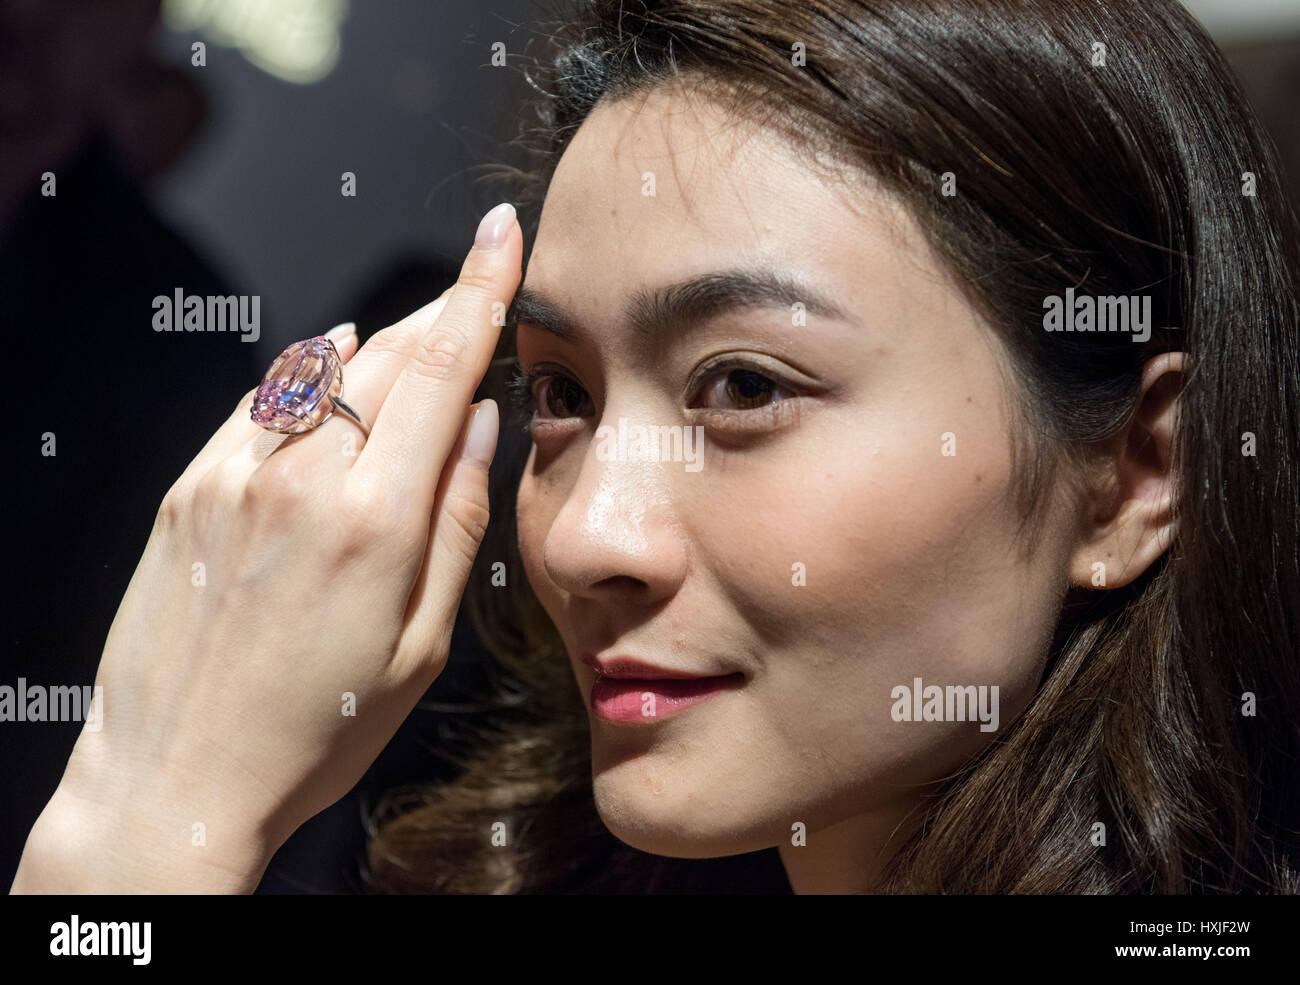 Hong Kong, Hong Kong SAR, China. 29th Mar, 2017. A model shows the 59.60 carat Pink Star diamond, expected to fetch US$60 million plus, to the press at Sotheby's auction house, Hong Kong.The Pink Star Diamond is extremely rare and is the largest internally flawless fancy vivid Pink Diamond ever graded by the GIA Credit: Jayne Russell/ZUMA Wire/Alamy Live News Stock Photo